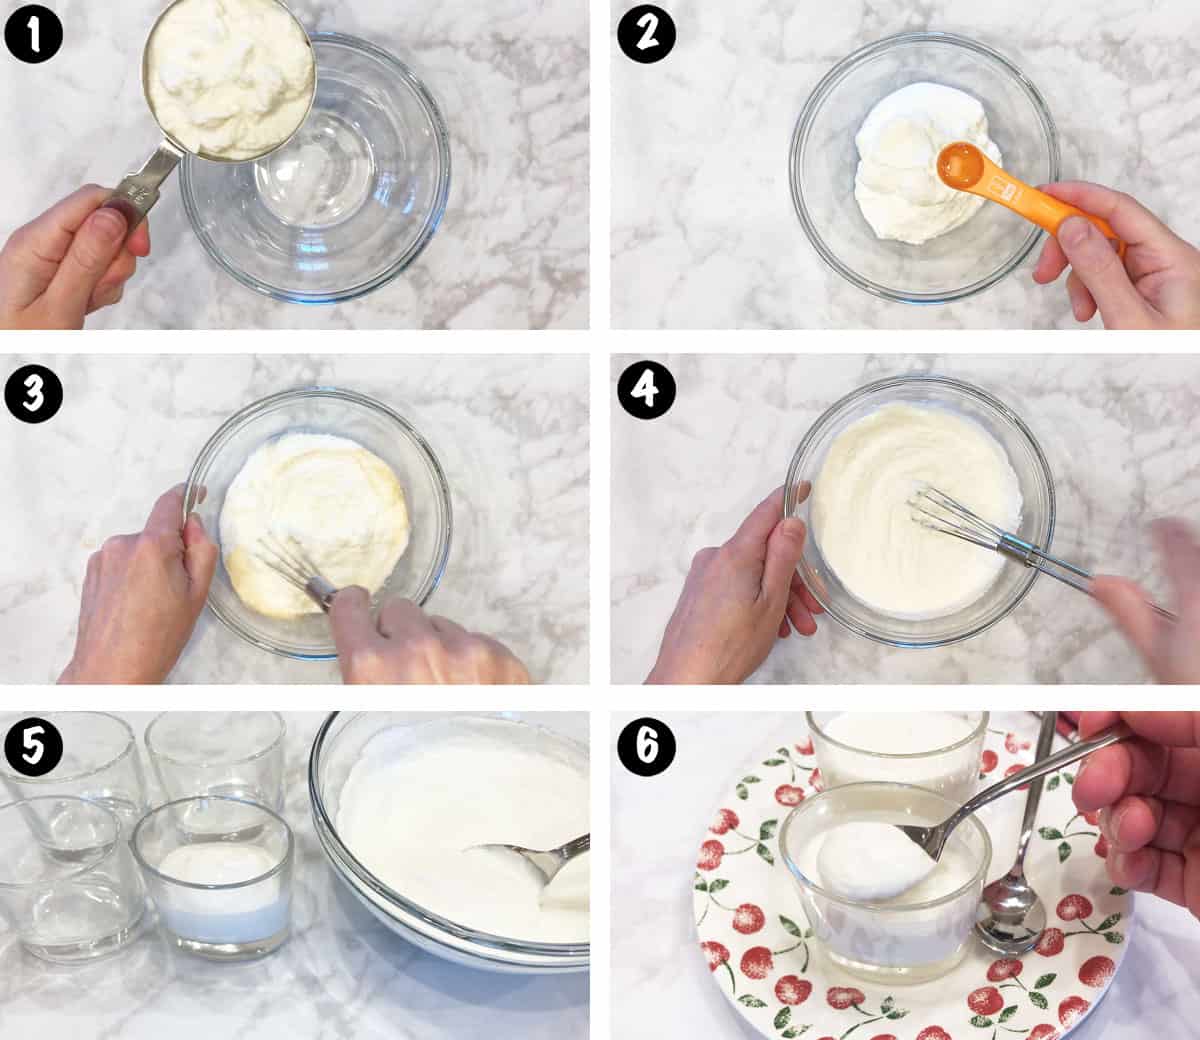 A collage showing the steps to make a ricotta dessert.